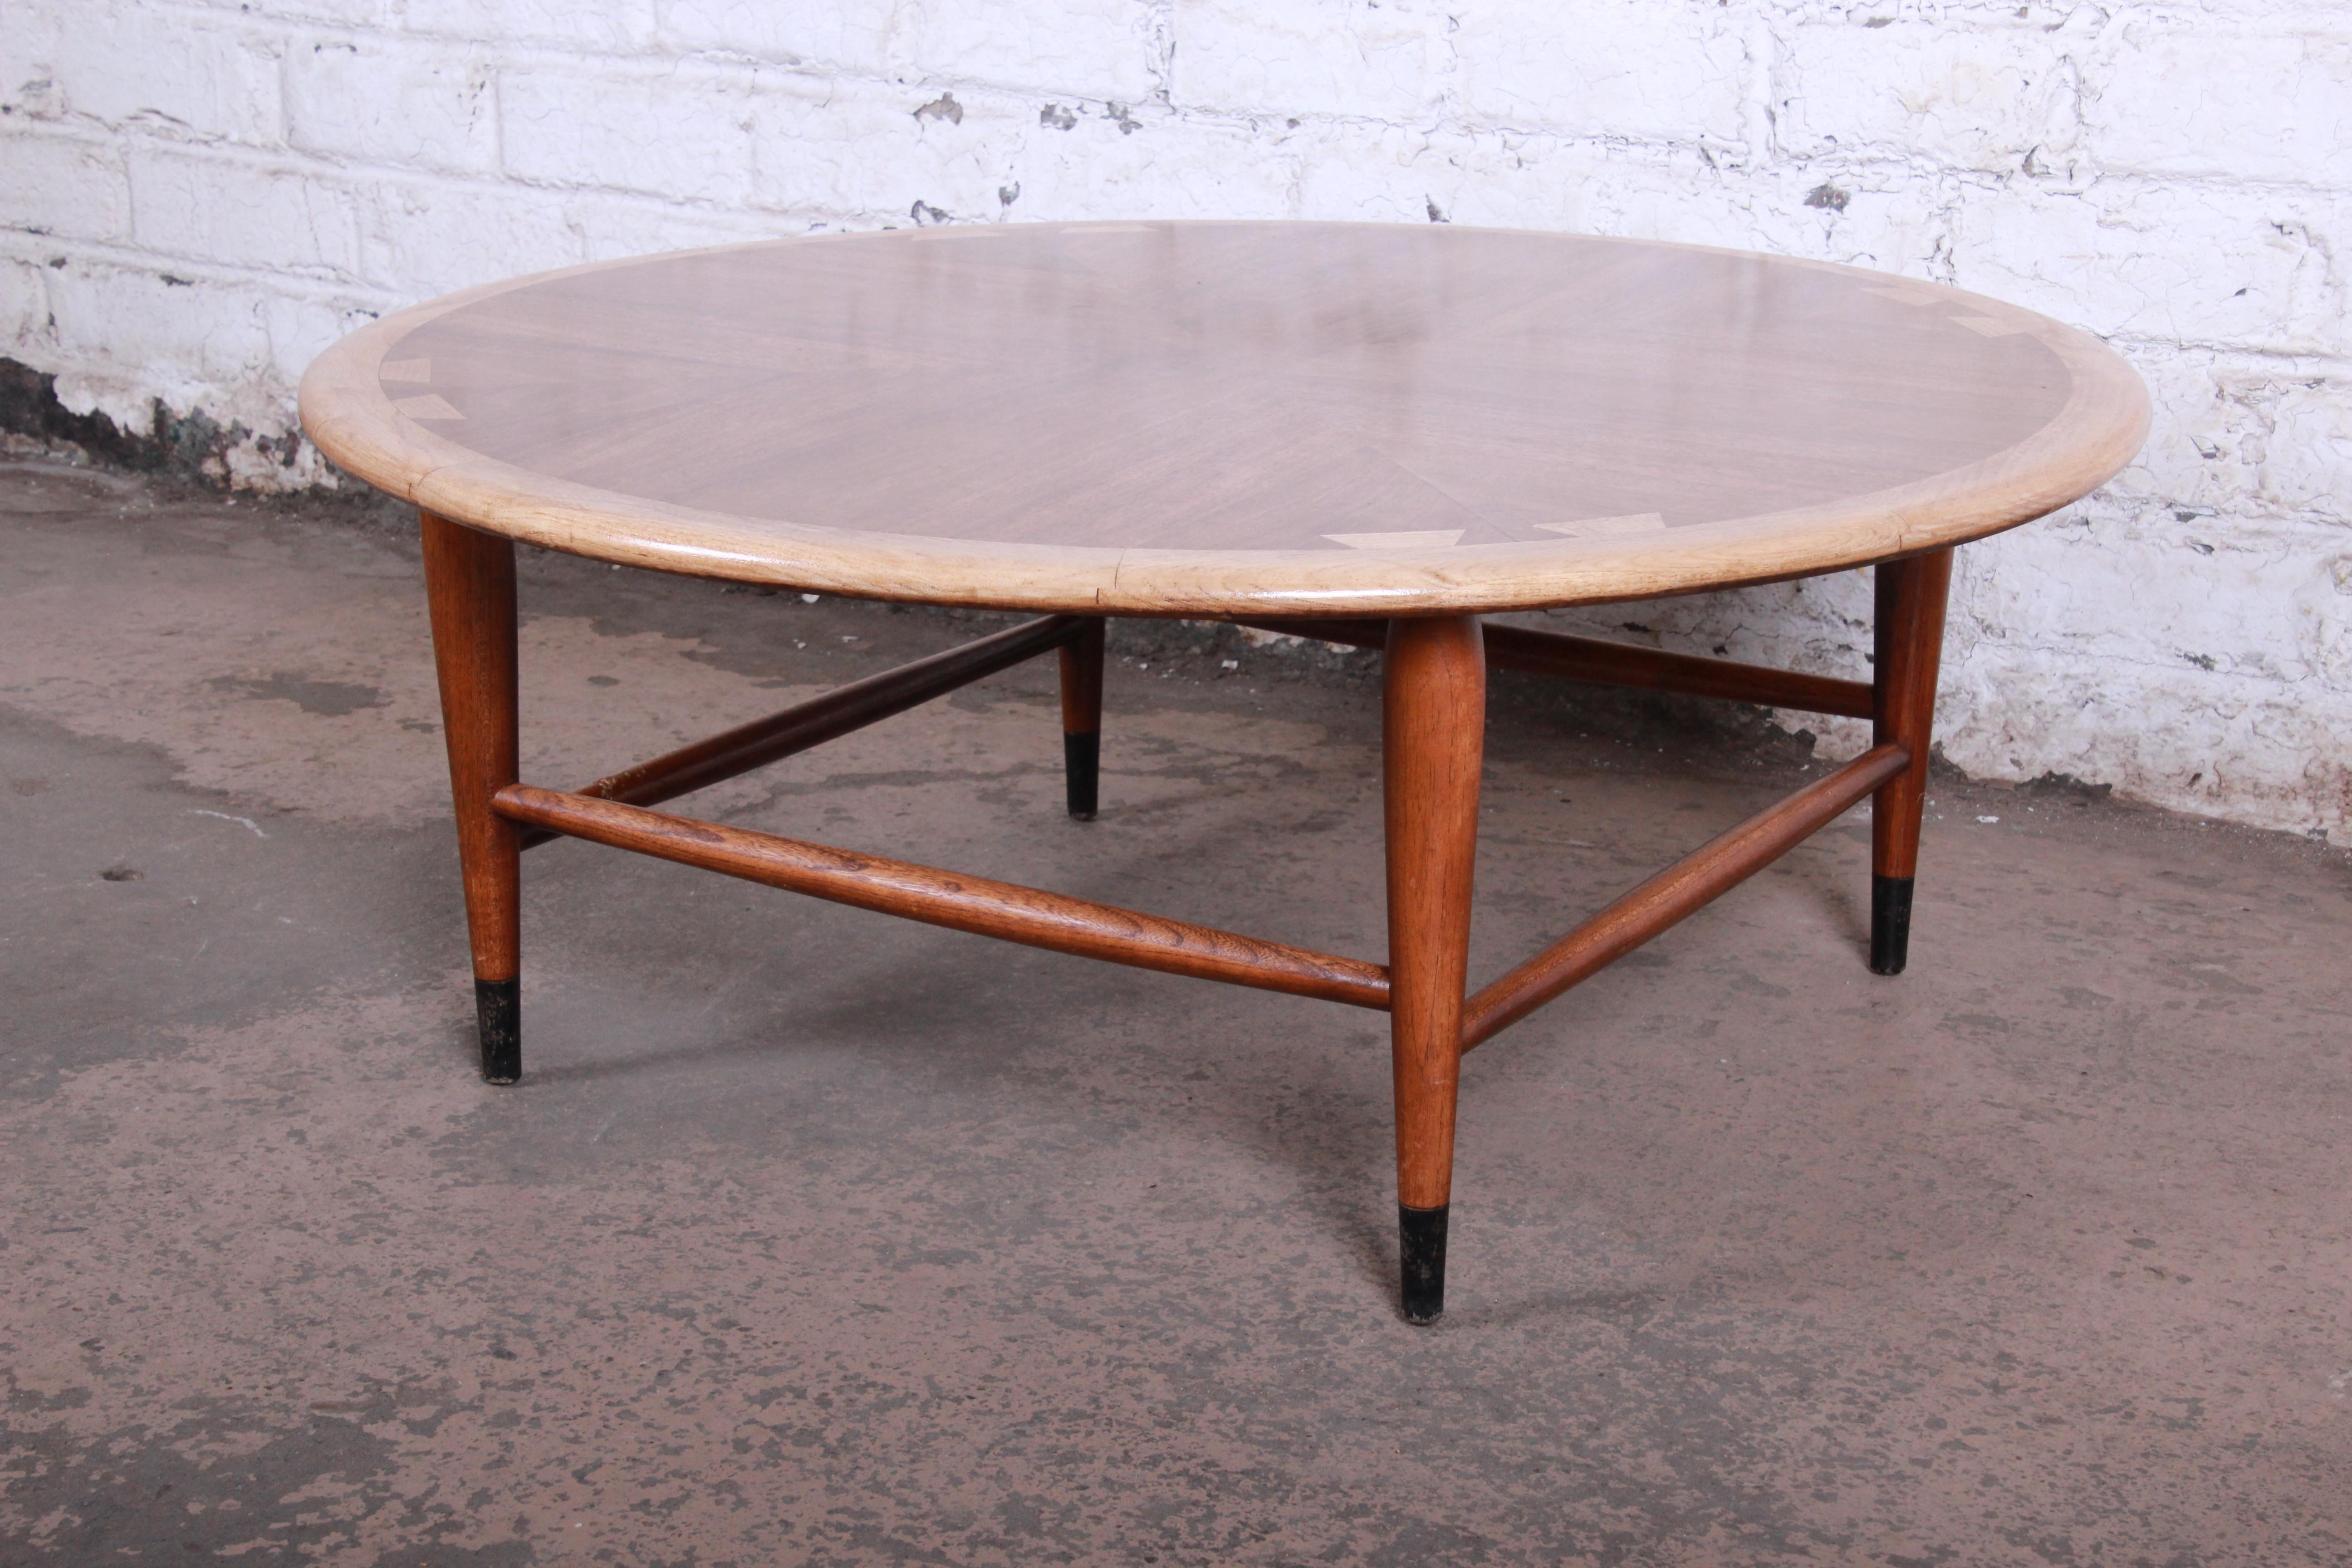 A beautiful Mid-Century Modern round coffee table from the Acclaim line by Lane. The table features gorgeous bookmatched walnut wood grain with the iconic ash dovetails. It has sculpted solid walnut legs and stretchers and ebonized feet. The